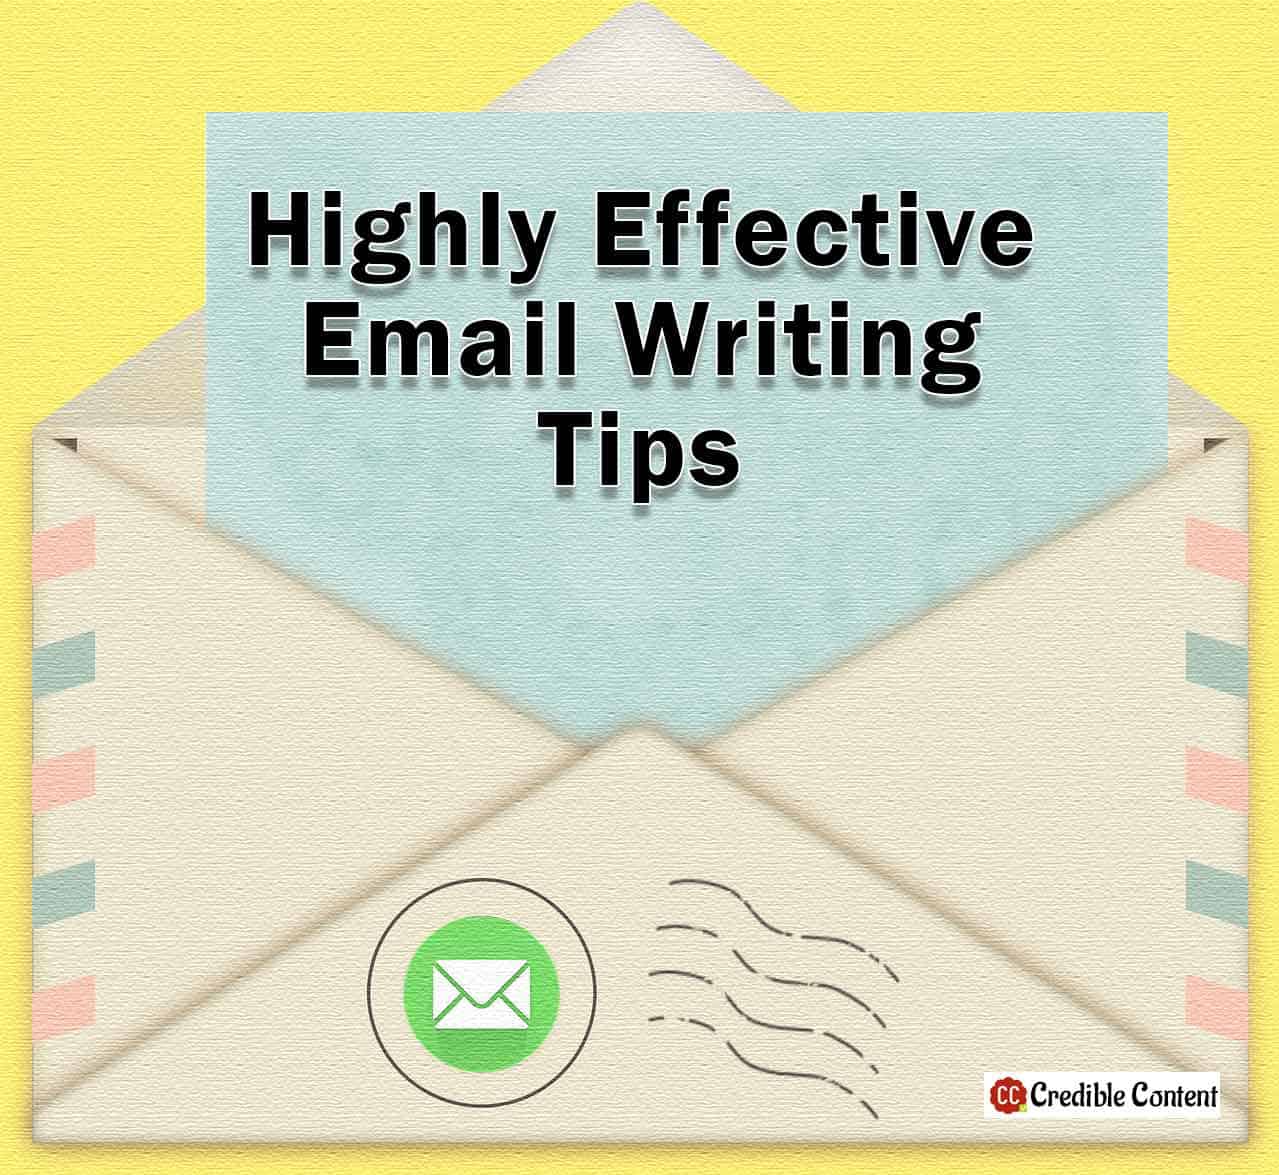 Highly effective email writing tips